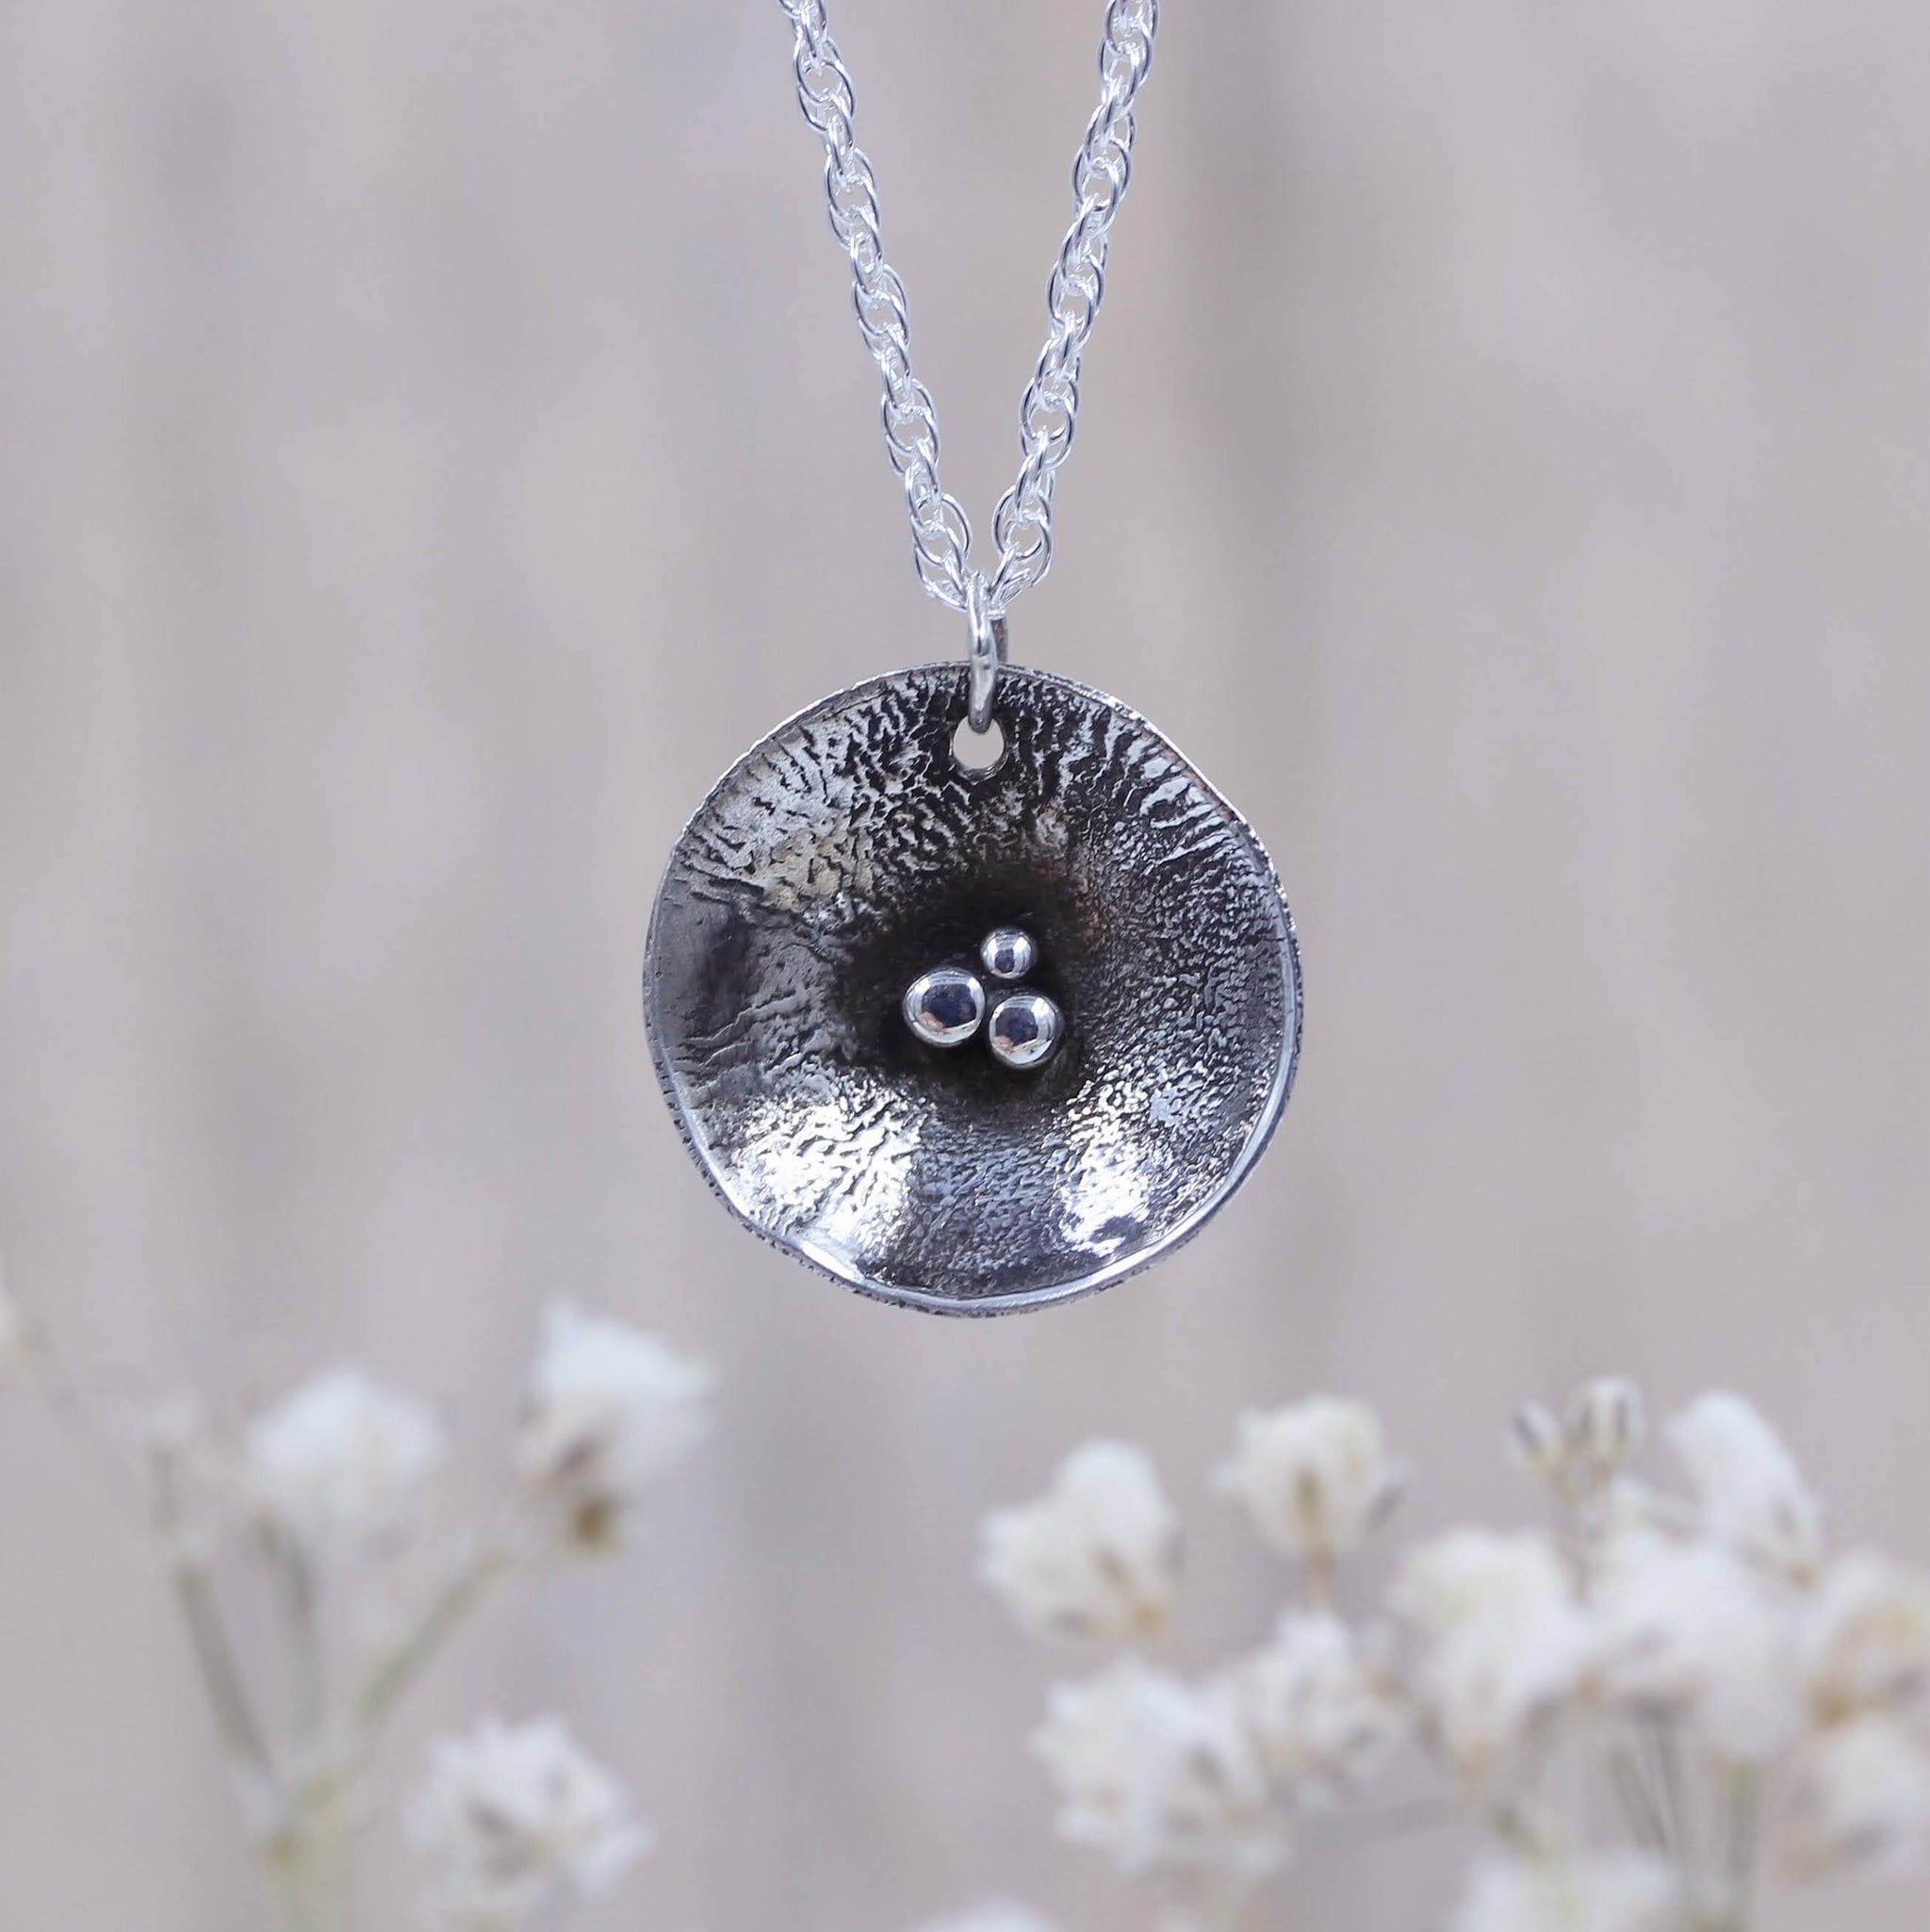 Sea Inspired silver necklace, handmade in 100% recycled silver